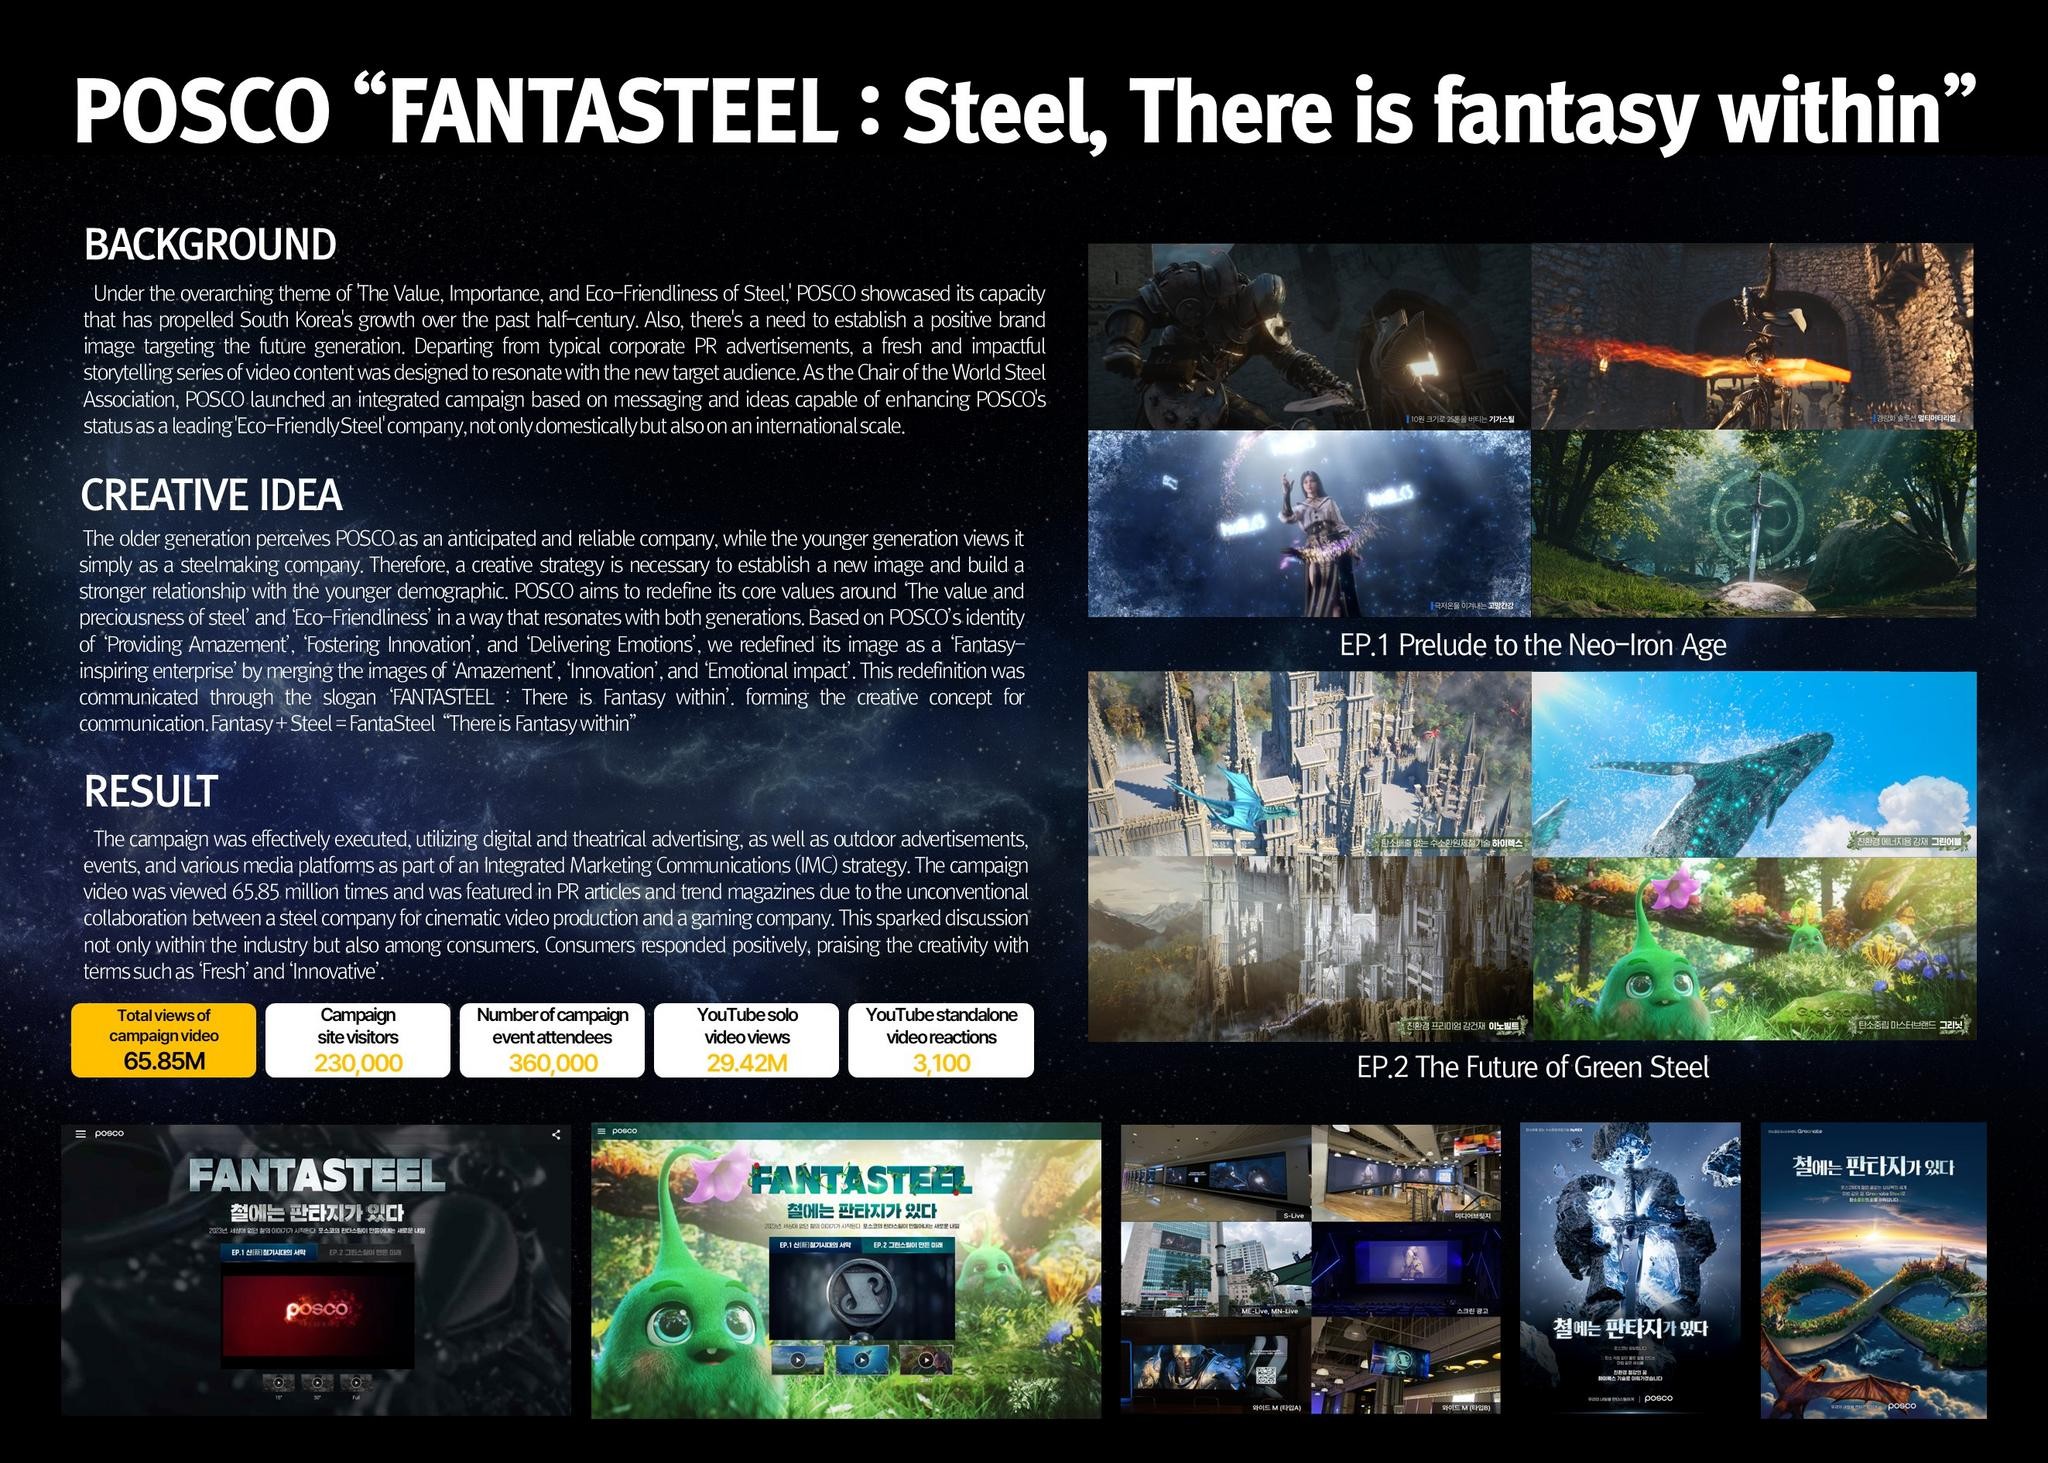 STEEL, THERE IS FANTASY WITHIN